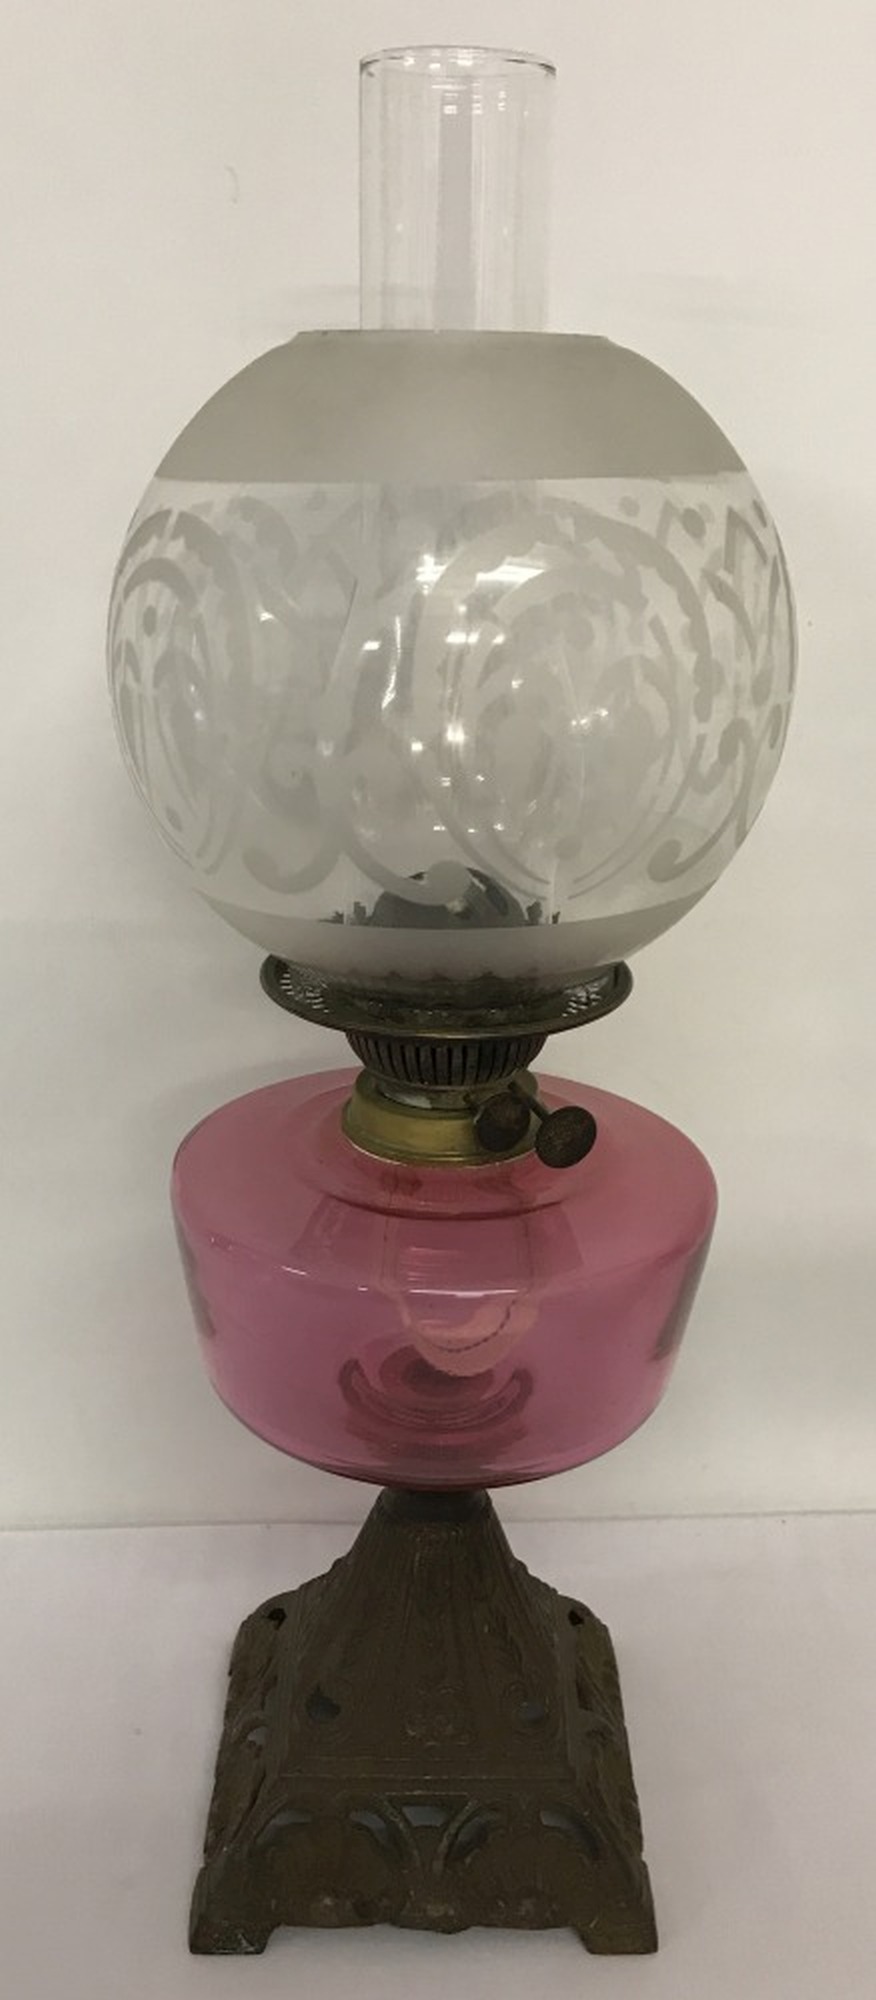 An Edwardian oil lamp with cast iron decorative base and cranberry coloured glass bowl.